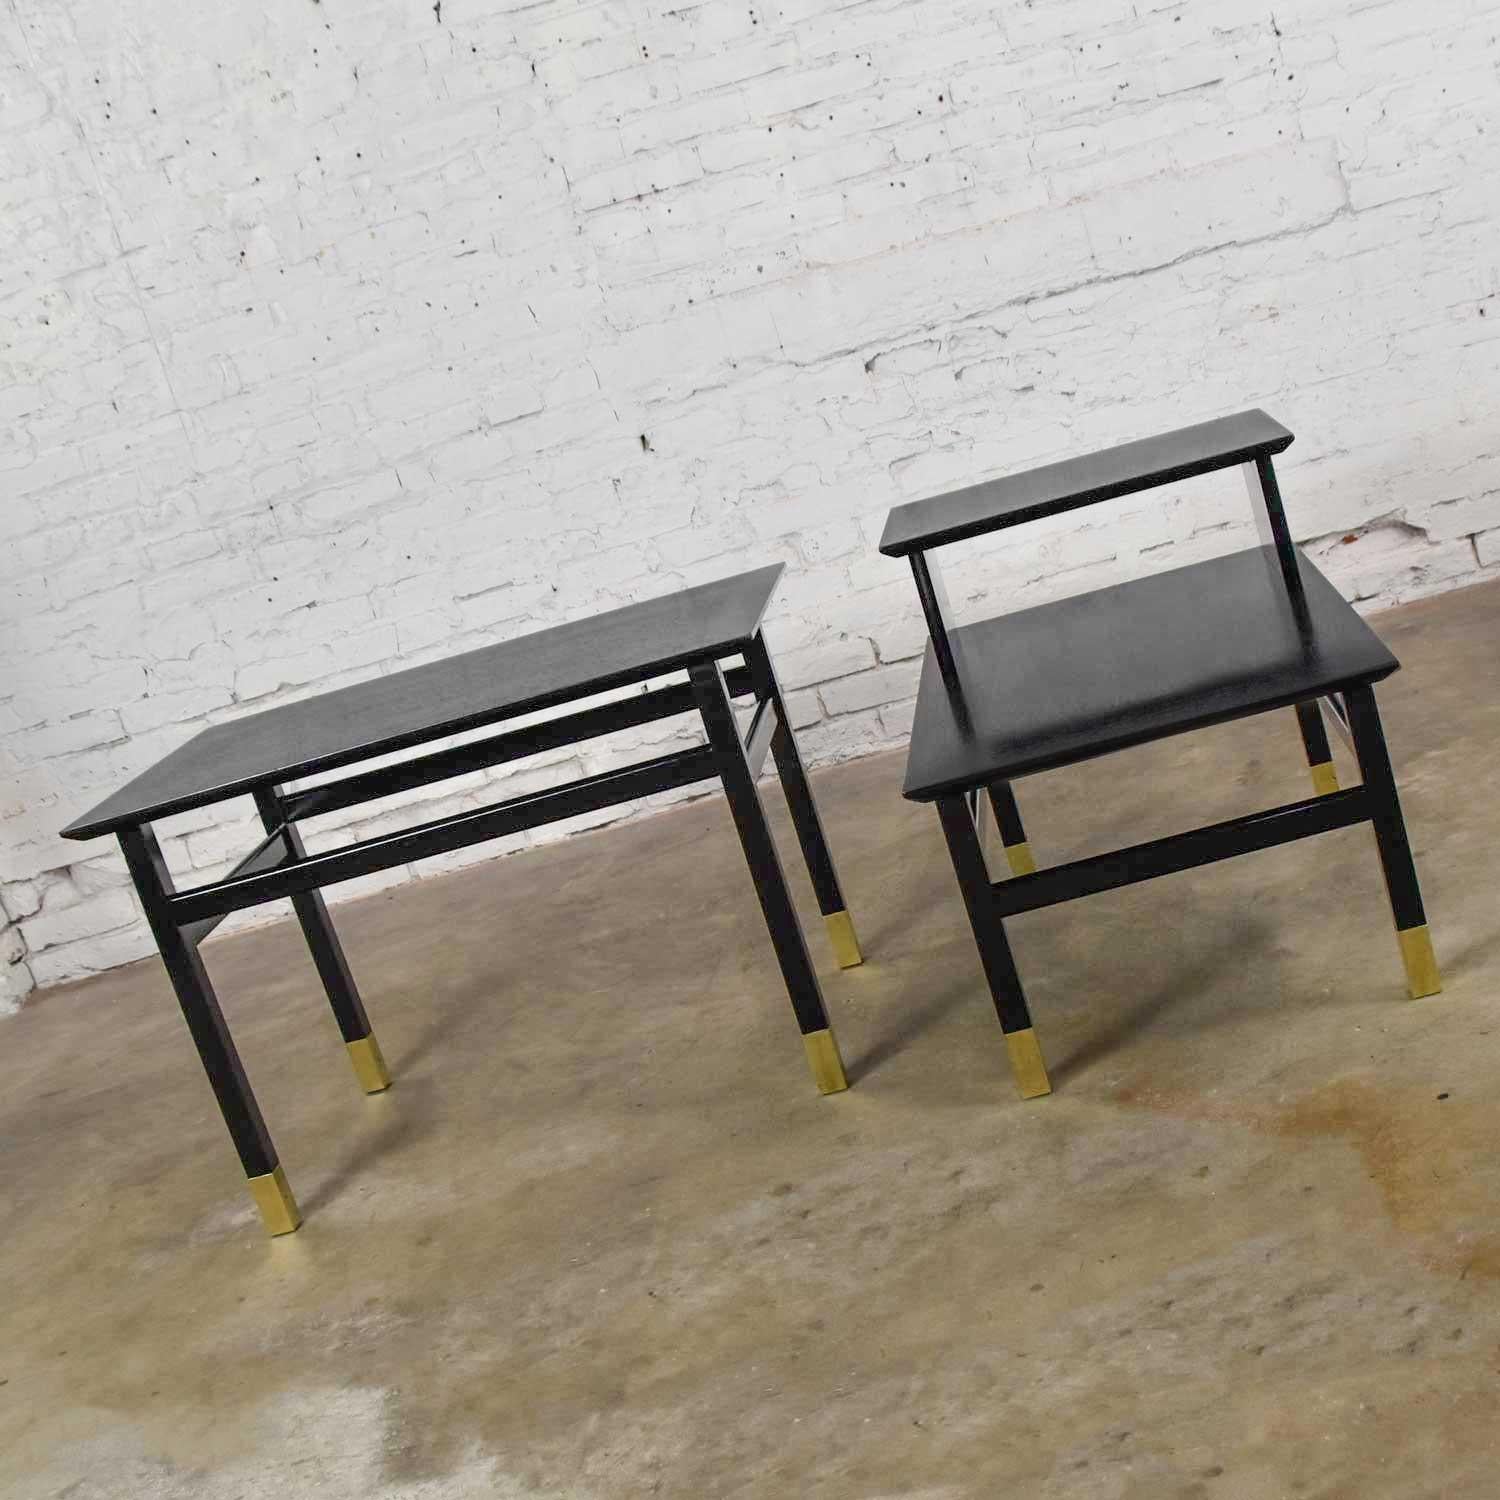 Wonderful pair of vintage mid-century modern side tables or end tables. One straight table and one step table from the Coronado Group by Luther Draper for Founders Furniture comprised of hardwood, brass sabots, and black satin painted finish.